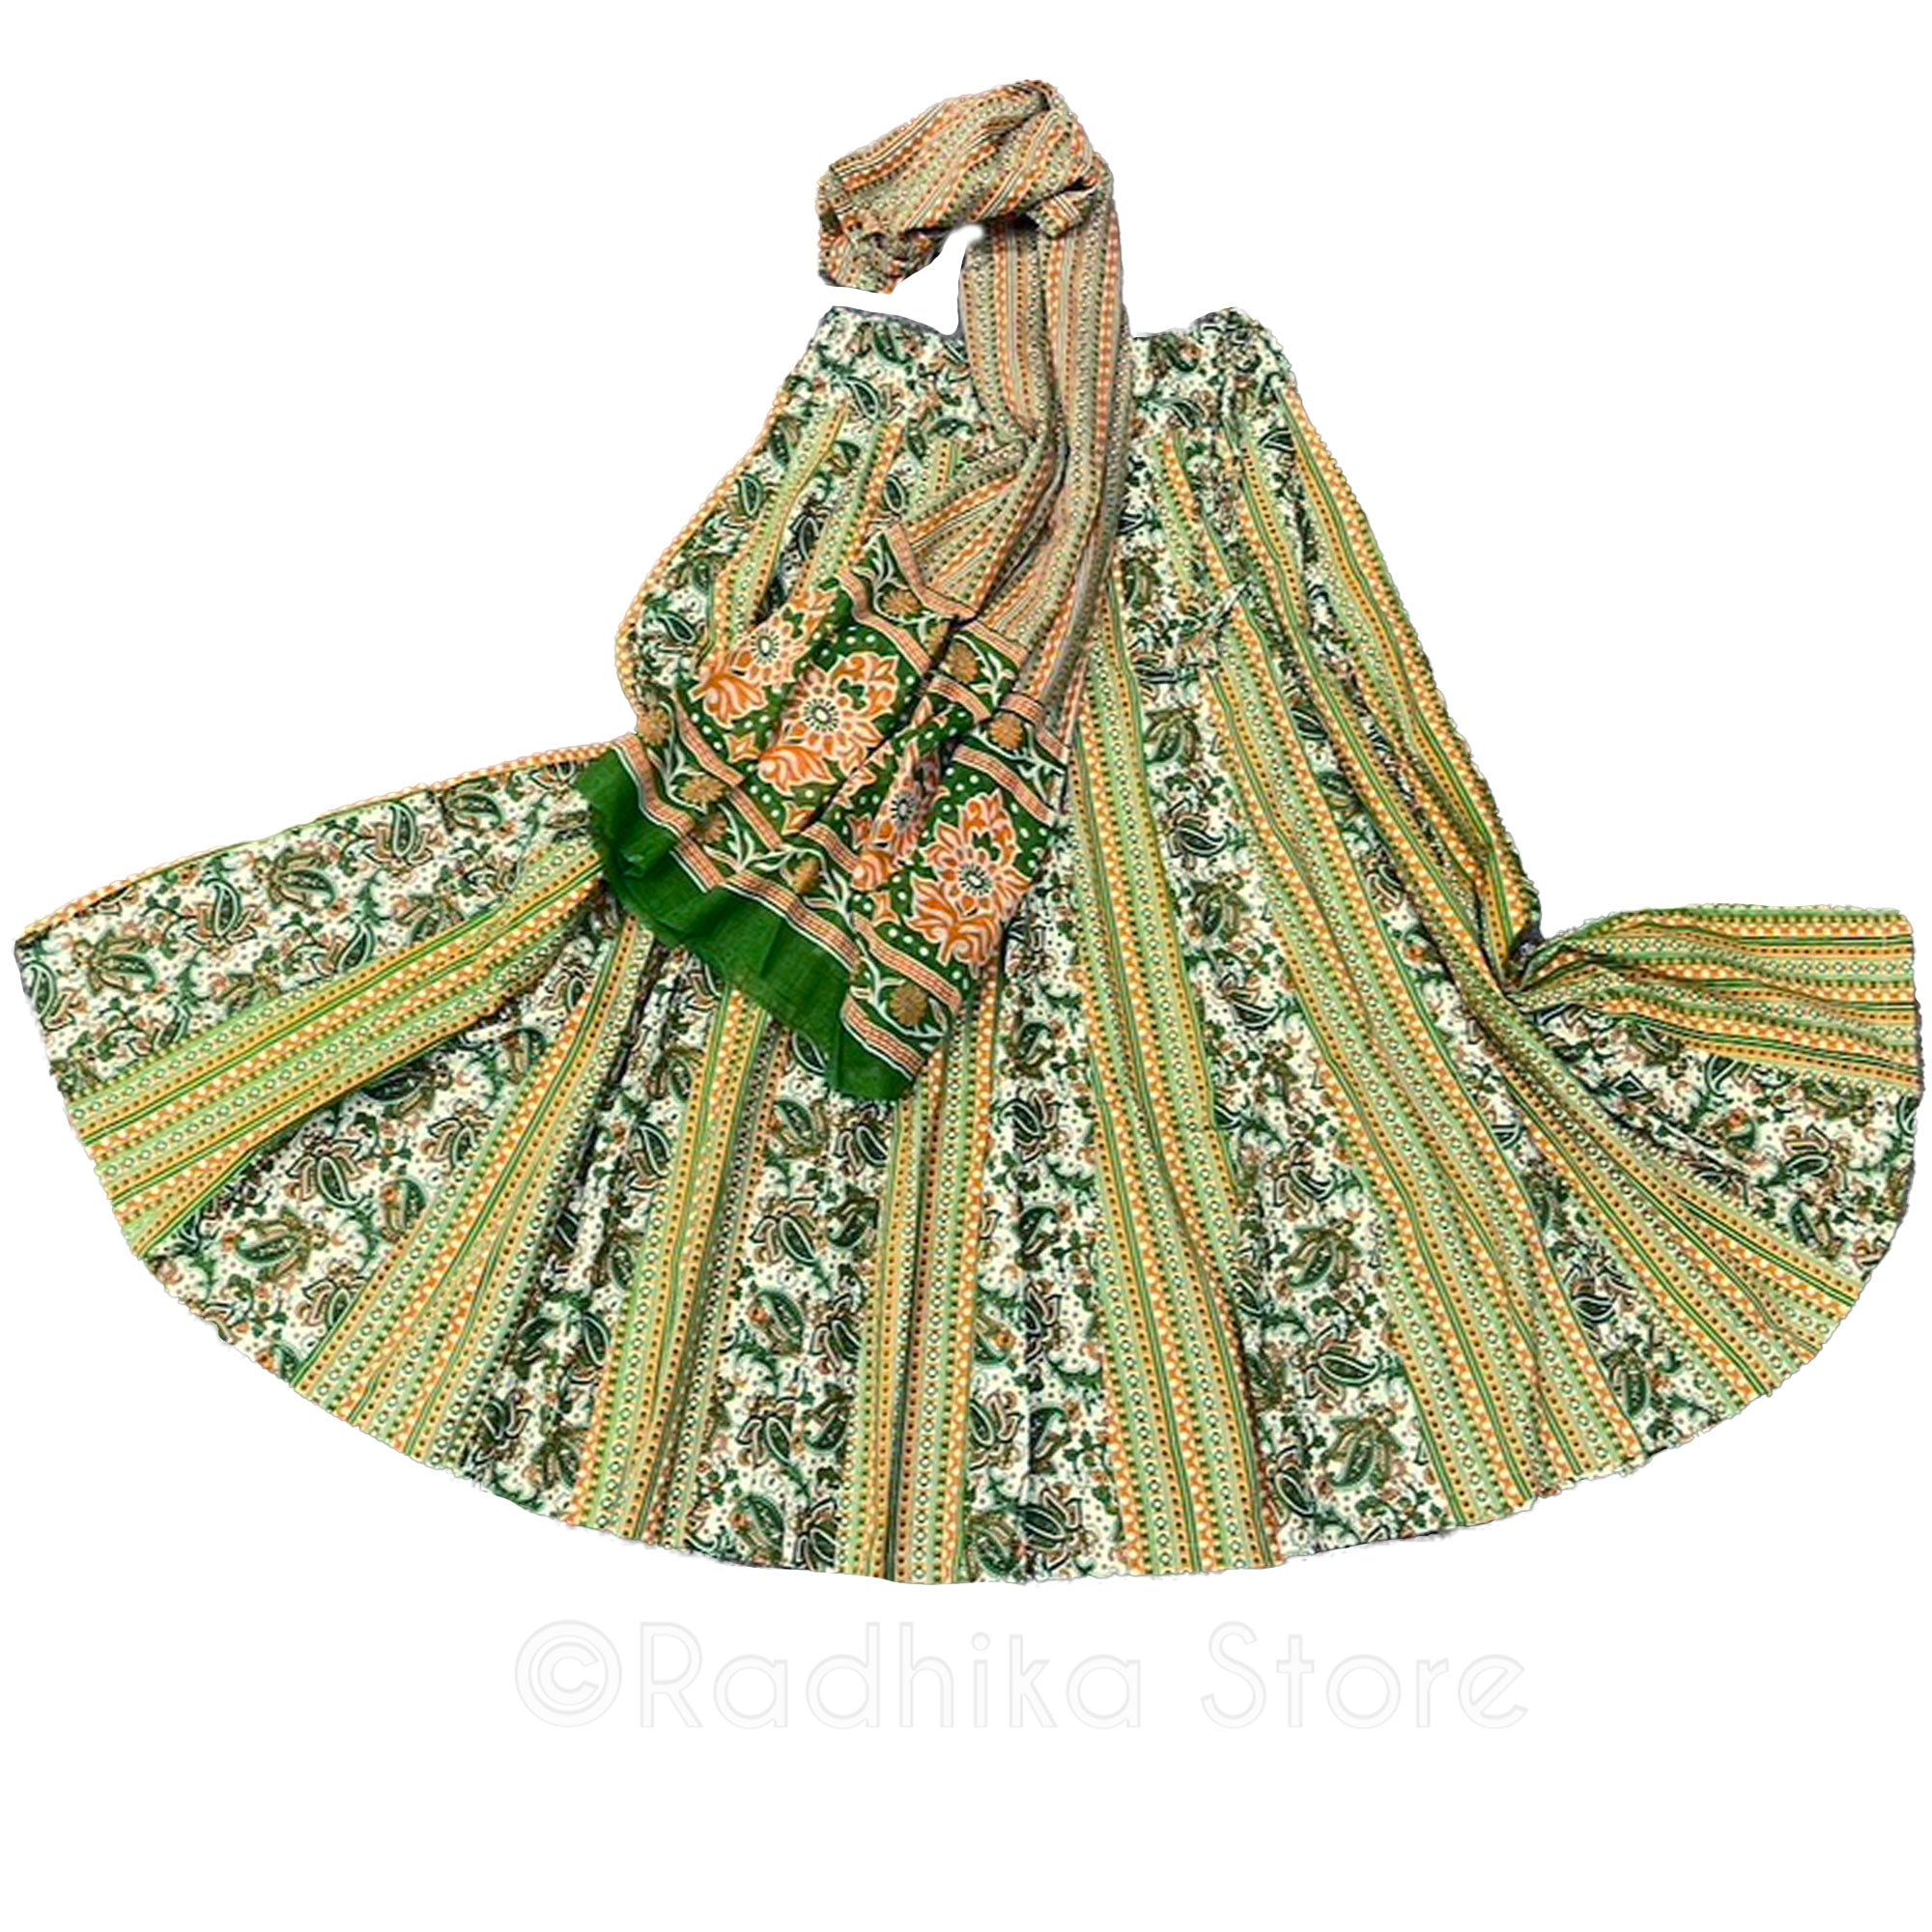 Braja Garden - Every Day - Gopi Skirt - Cotton Fabric - With Chadar - Large